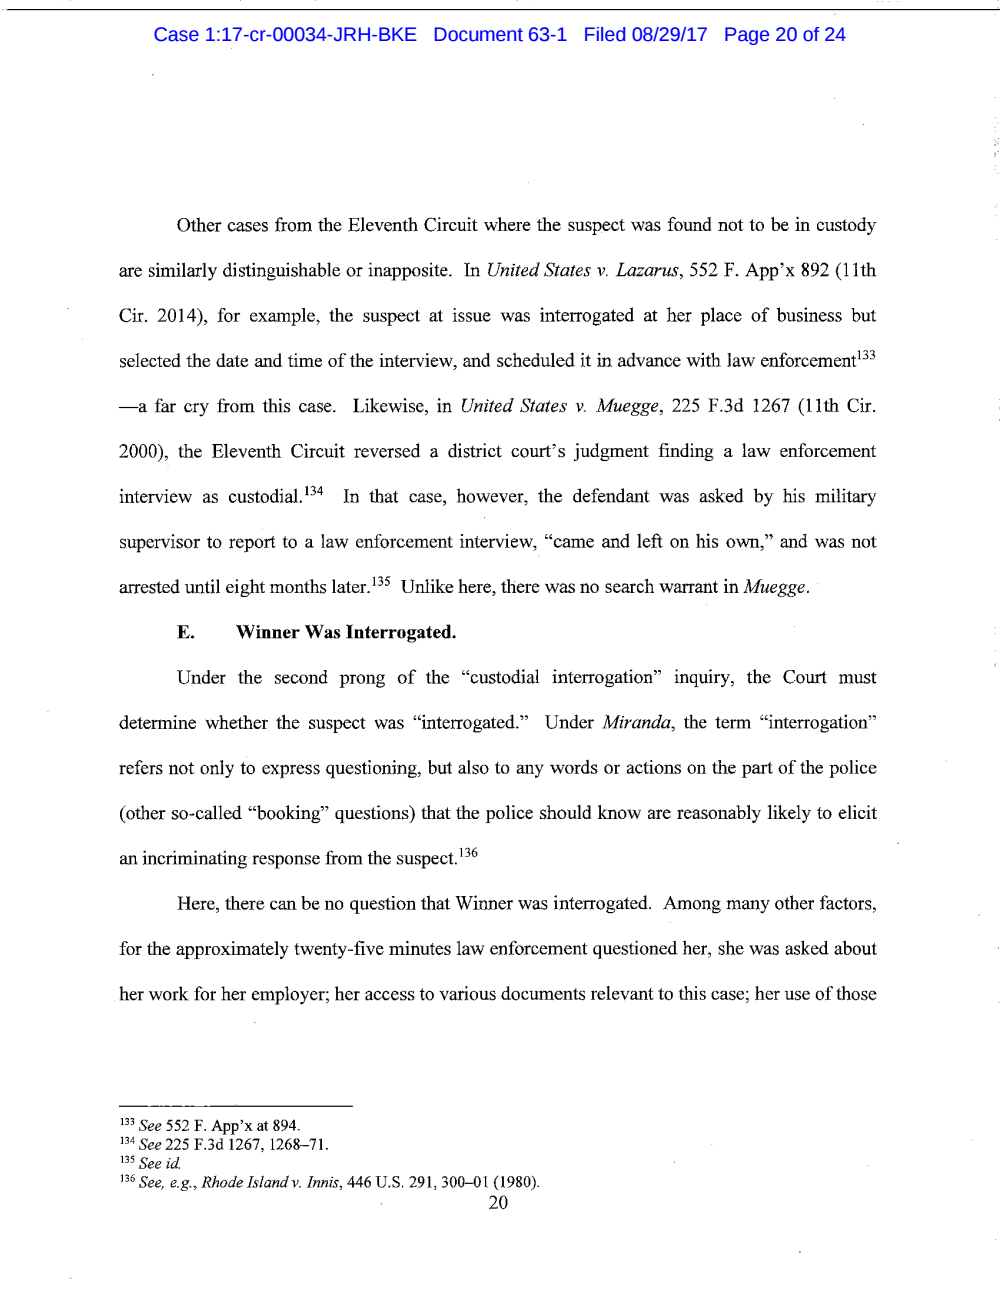 Page 20 from Reality Winner Memo in Support of Motion to Suppress